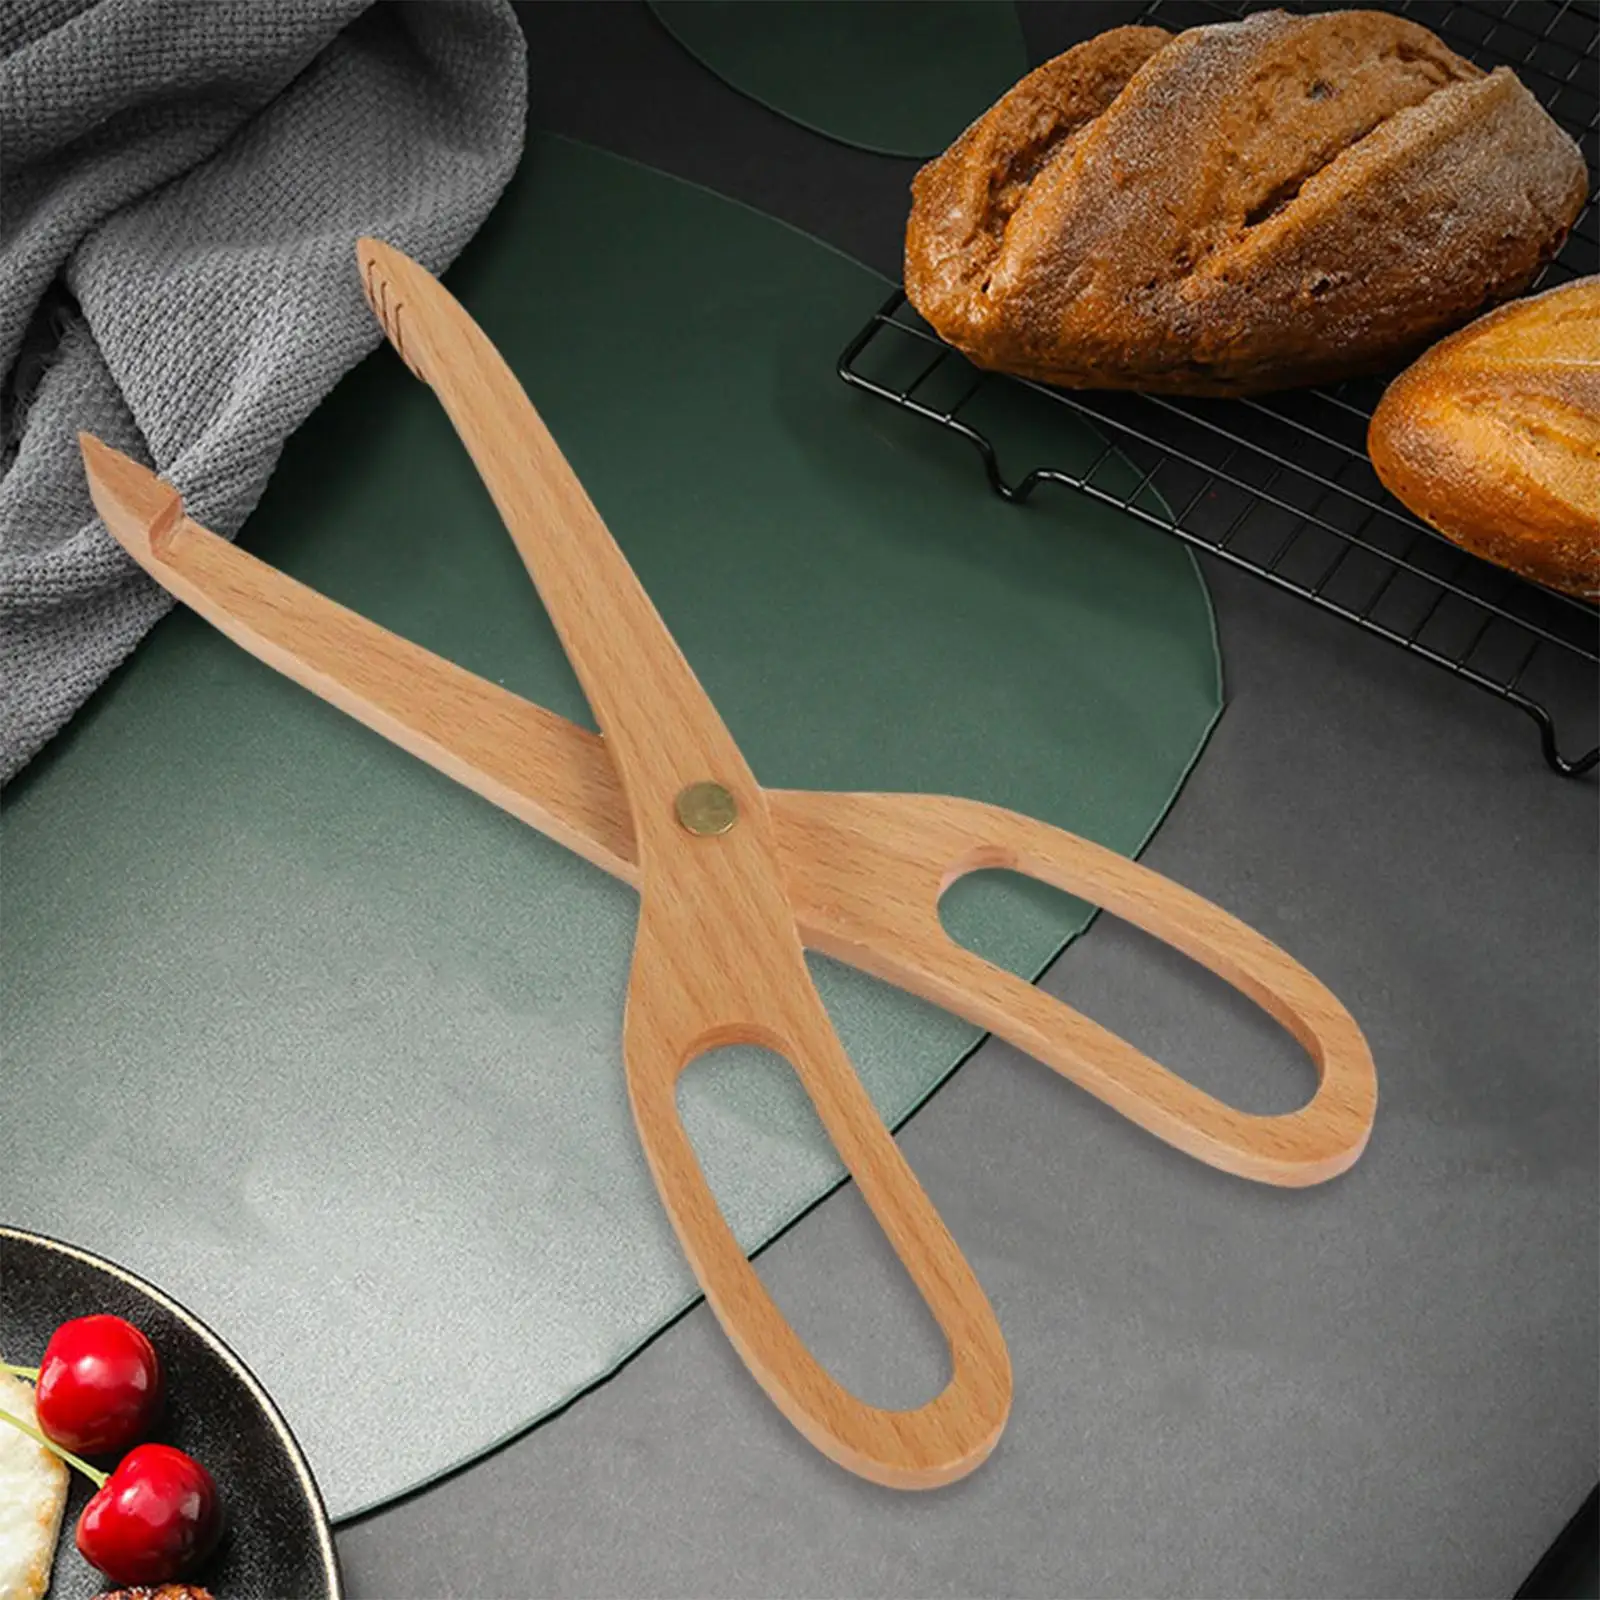 Scissor Type Wooden Kitchen Tongs Heavy Duty Nonstick Non Slip Food Clamp Salad Server Toaster Tongs for Cooking BBQ Baking